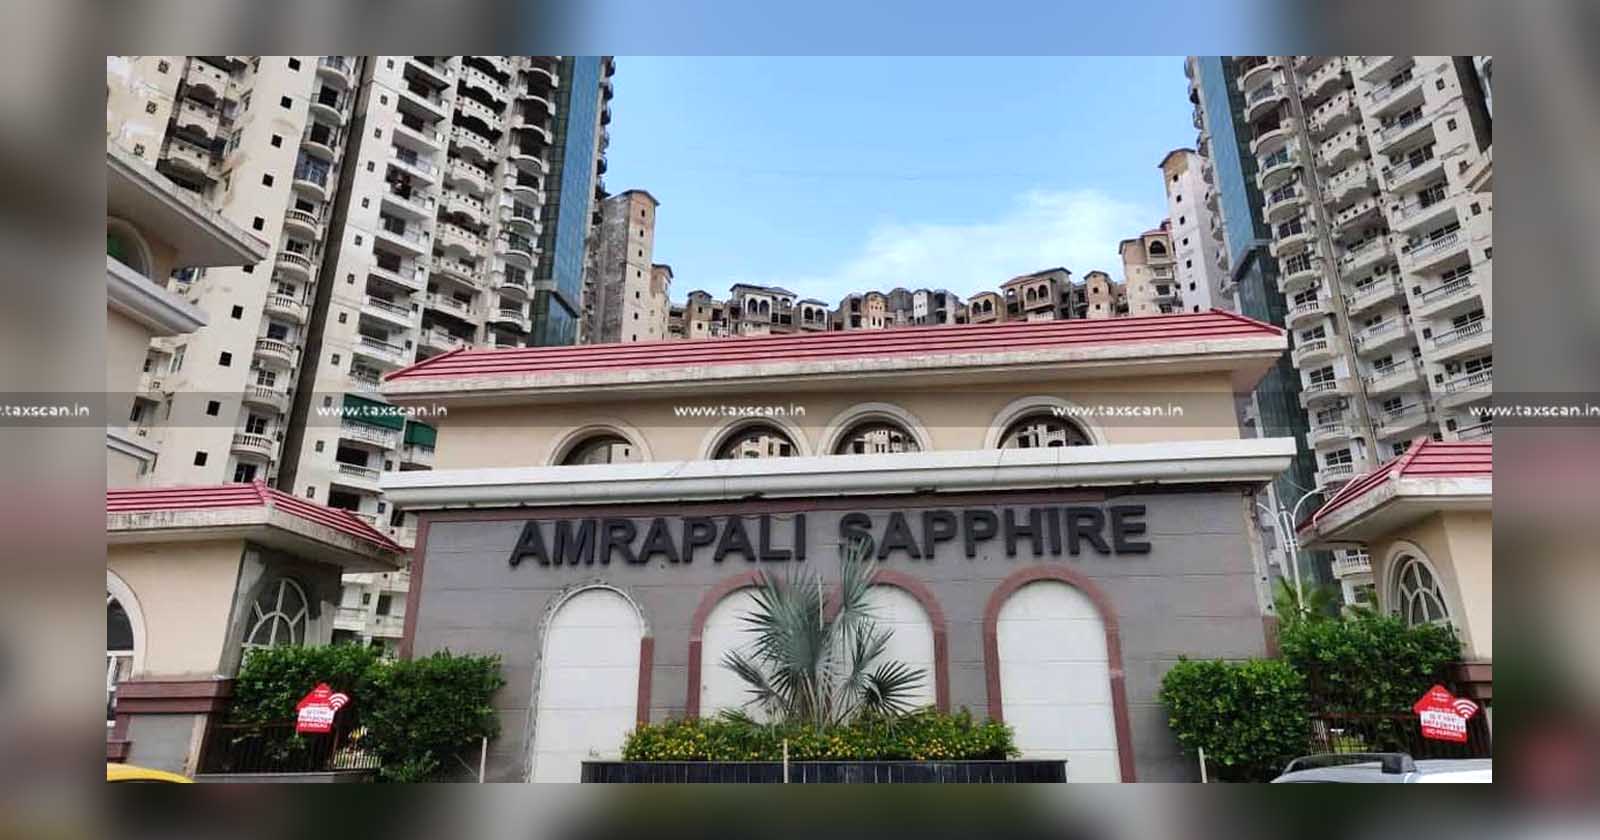 Amrapali Housing Scam - ICAI - Ex-Statutory Auditor - Ex-Statutory Auditor CA Anil Mittal - CA Anil Mittal - Imposes Fine - Fine - Chartered Accountant - taxscan